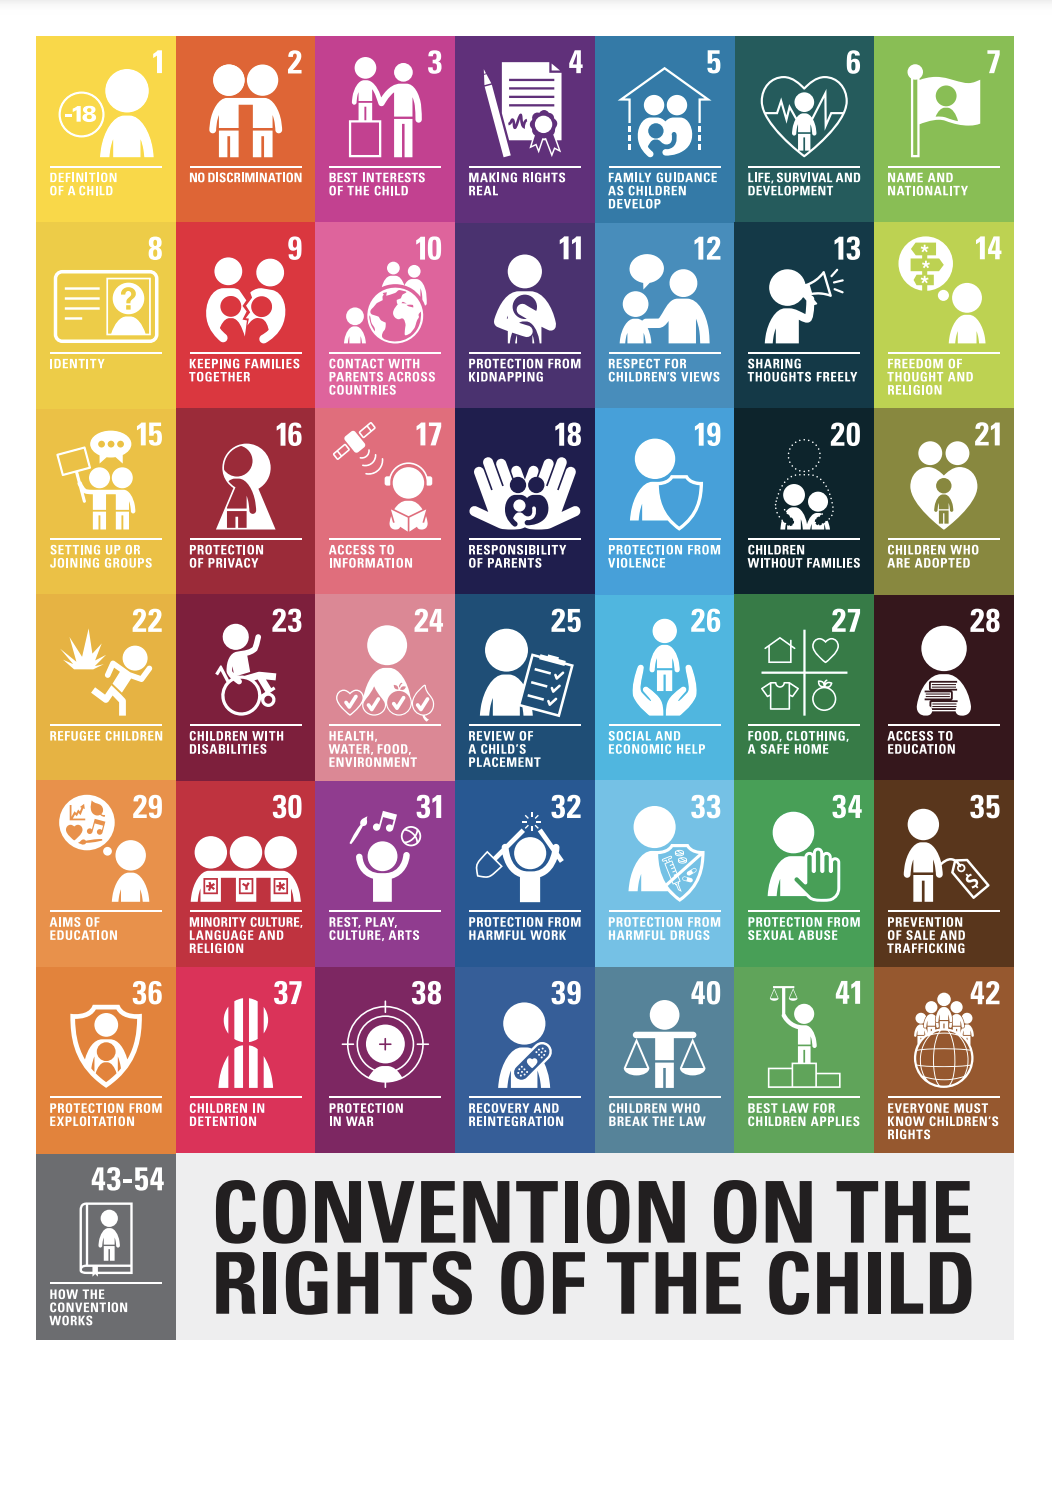 Convention on the Rights of the Child booklet